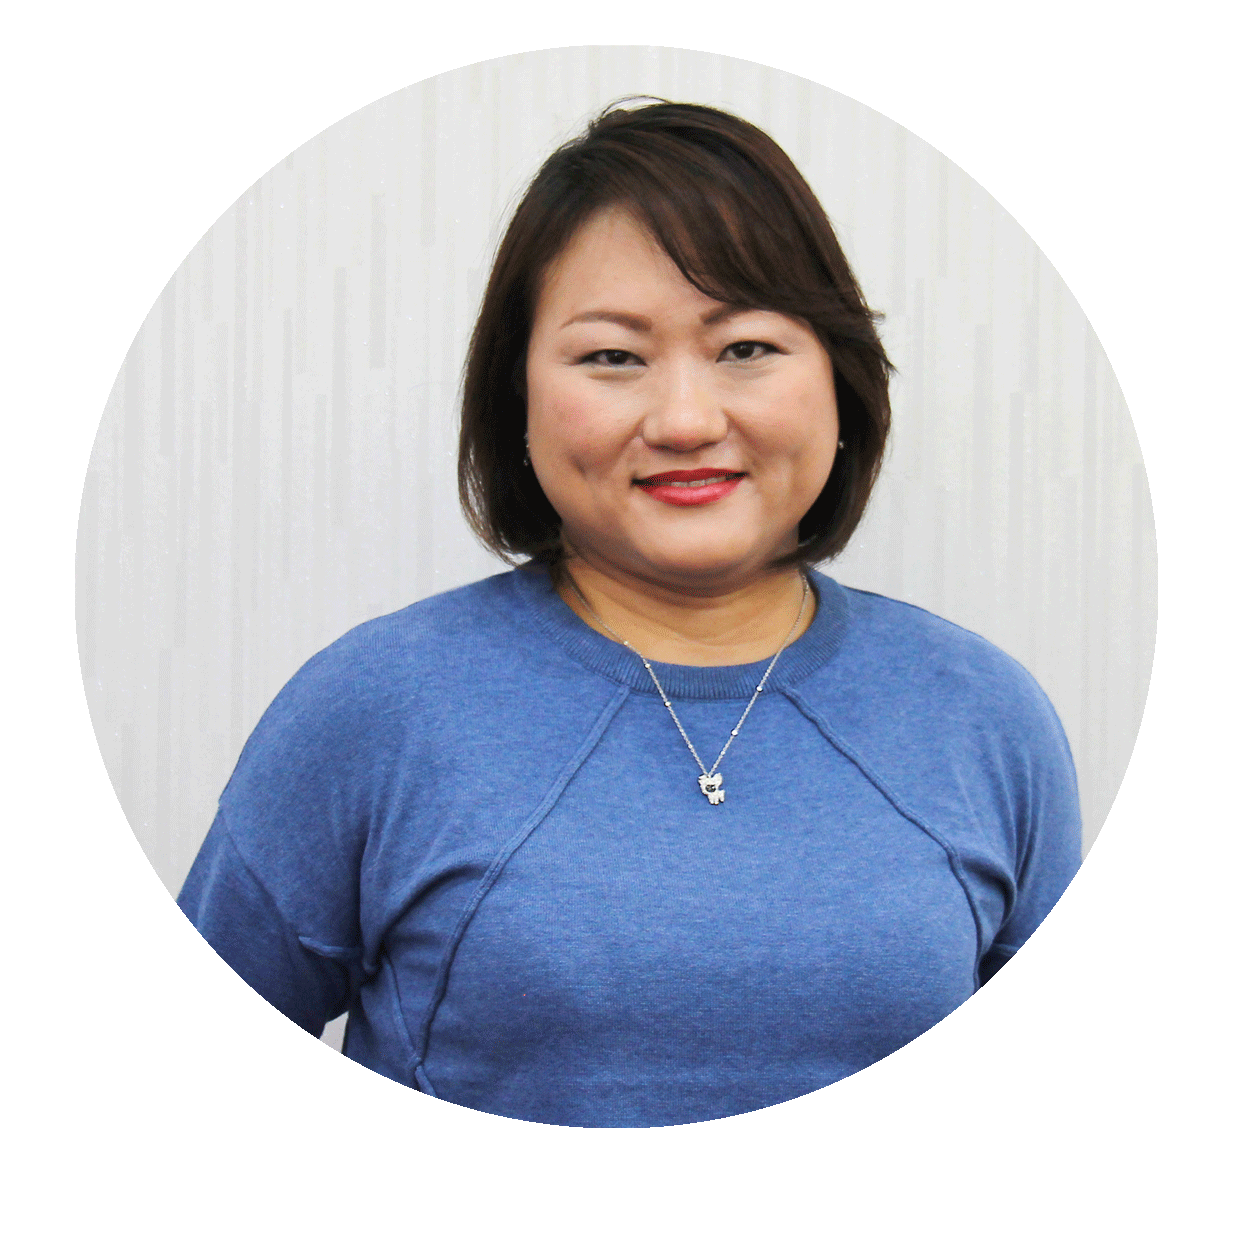 Lee Kek Yin Mabel - Master of Science in Occupational Safety, Health and Wellbeing - Master Degree student at DIMENSIONS Singapore